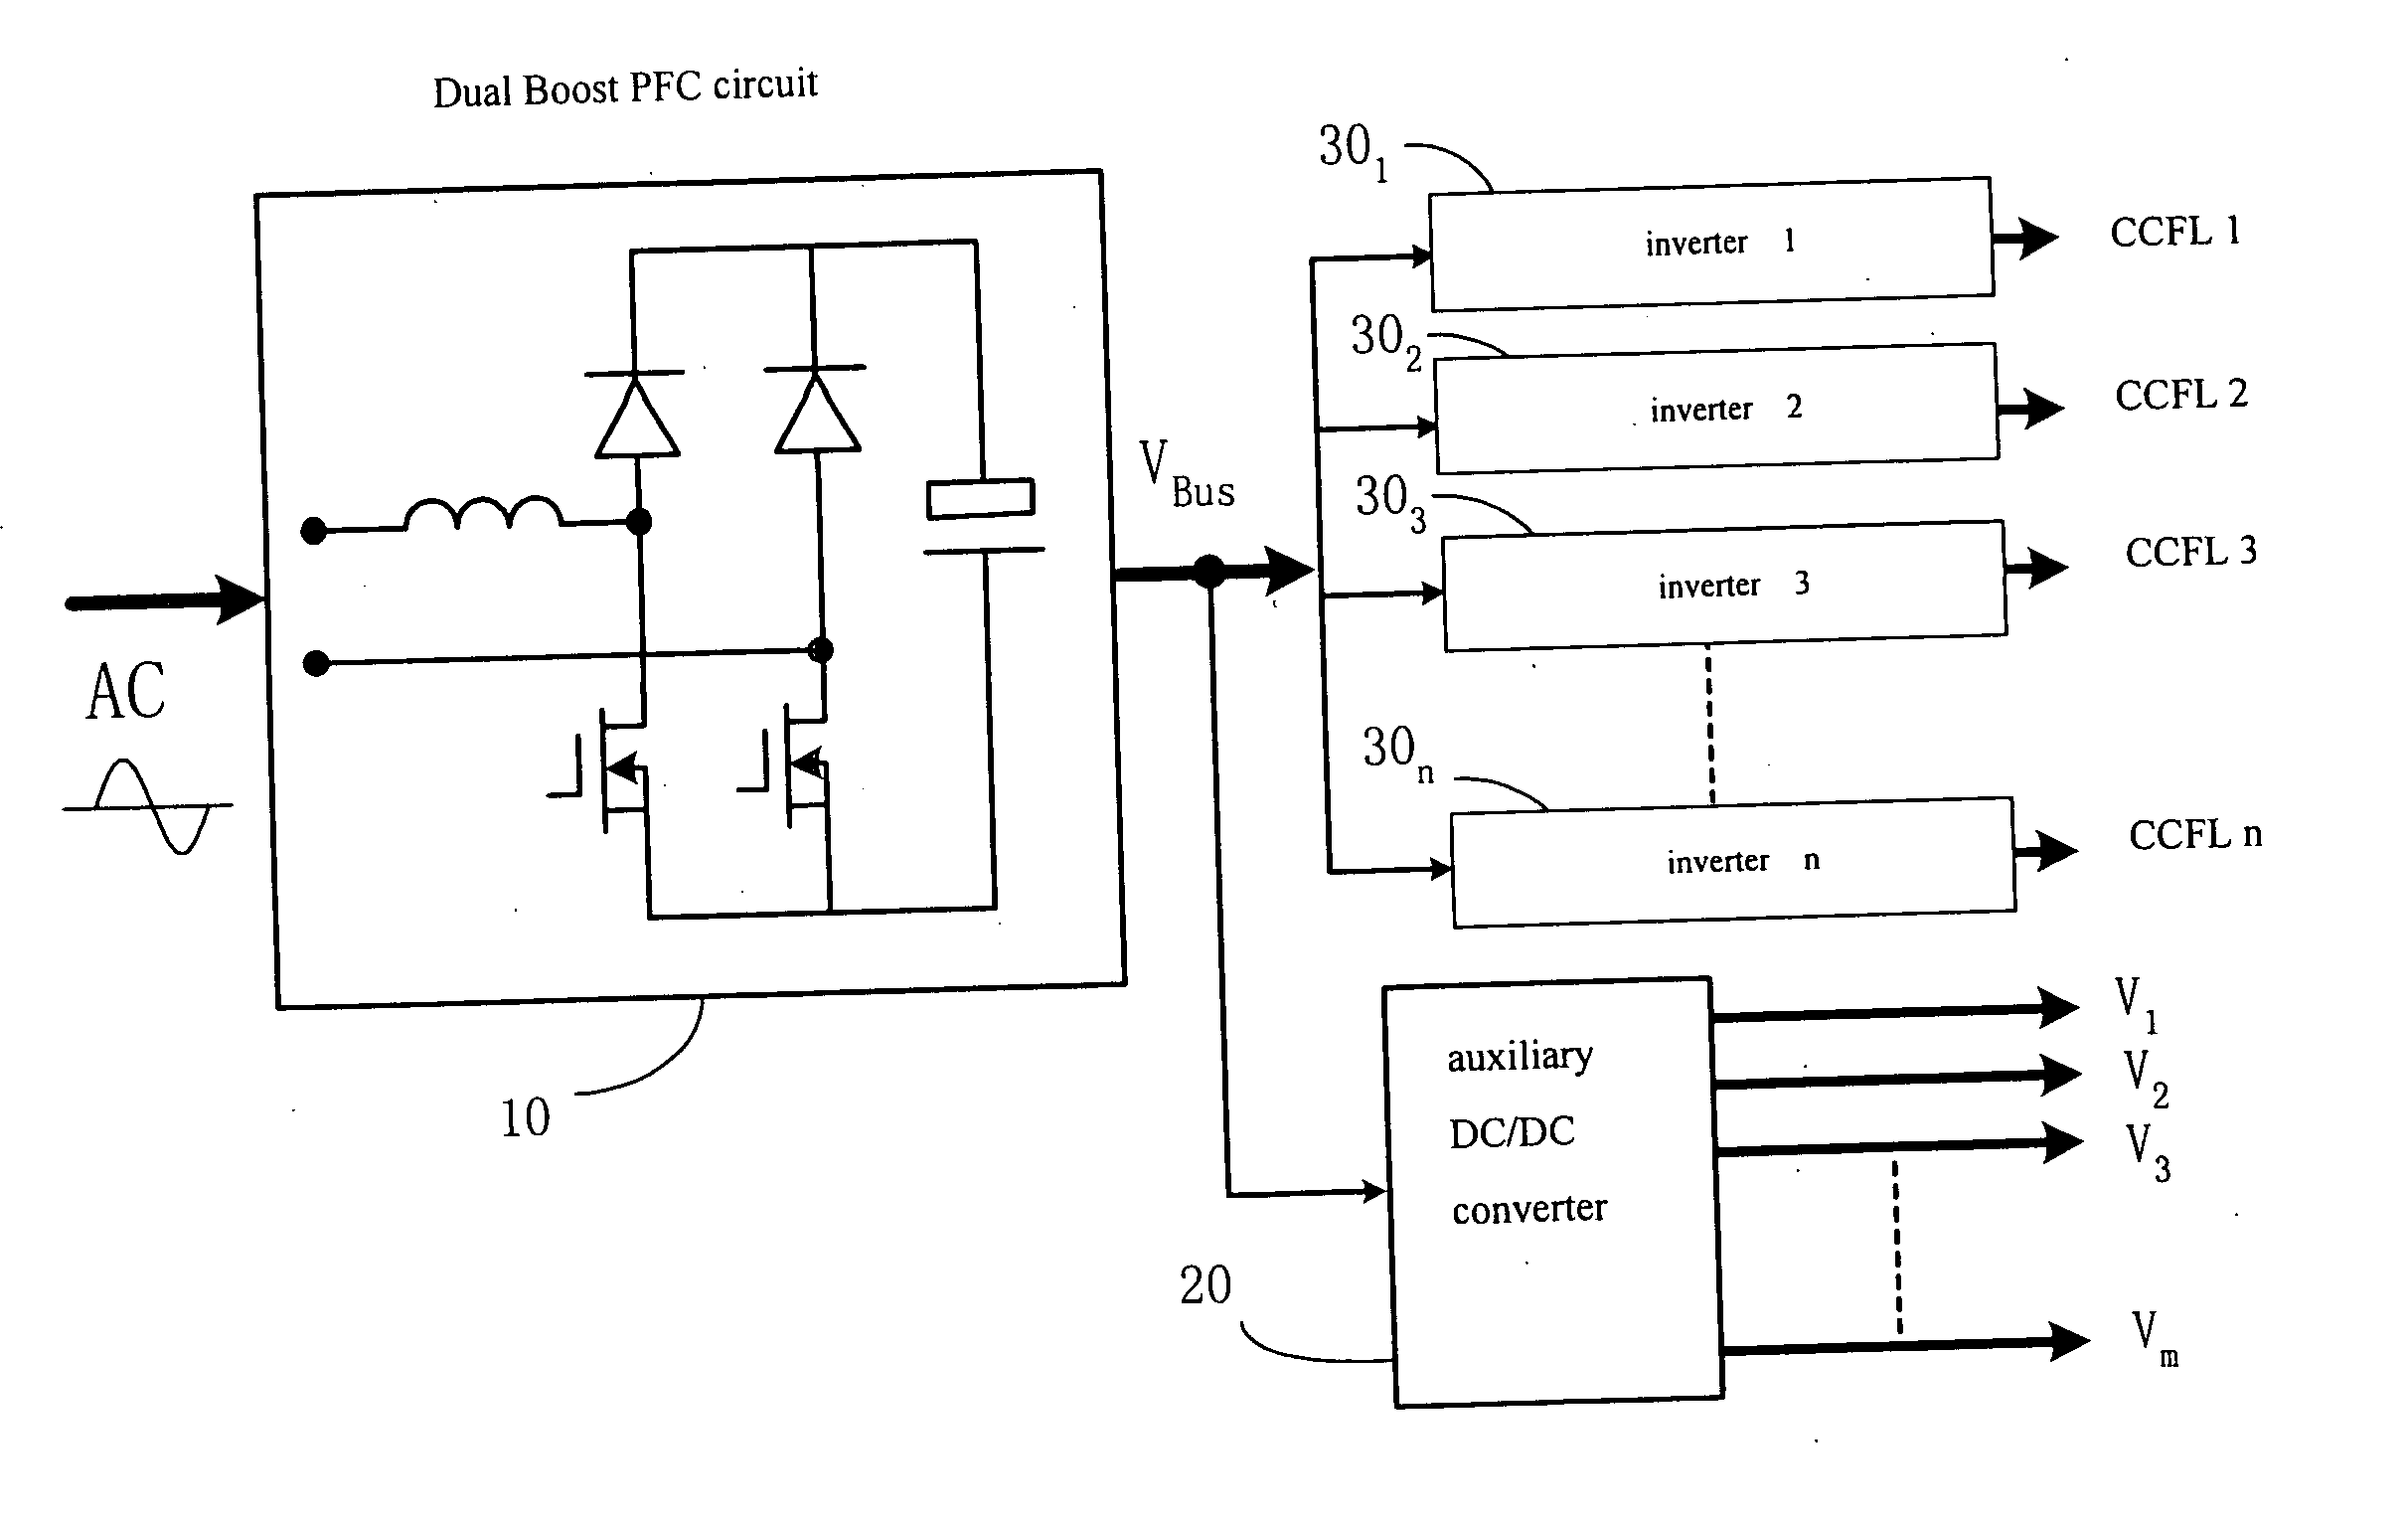 Architecture of power supply system for LCD apparatus